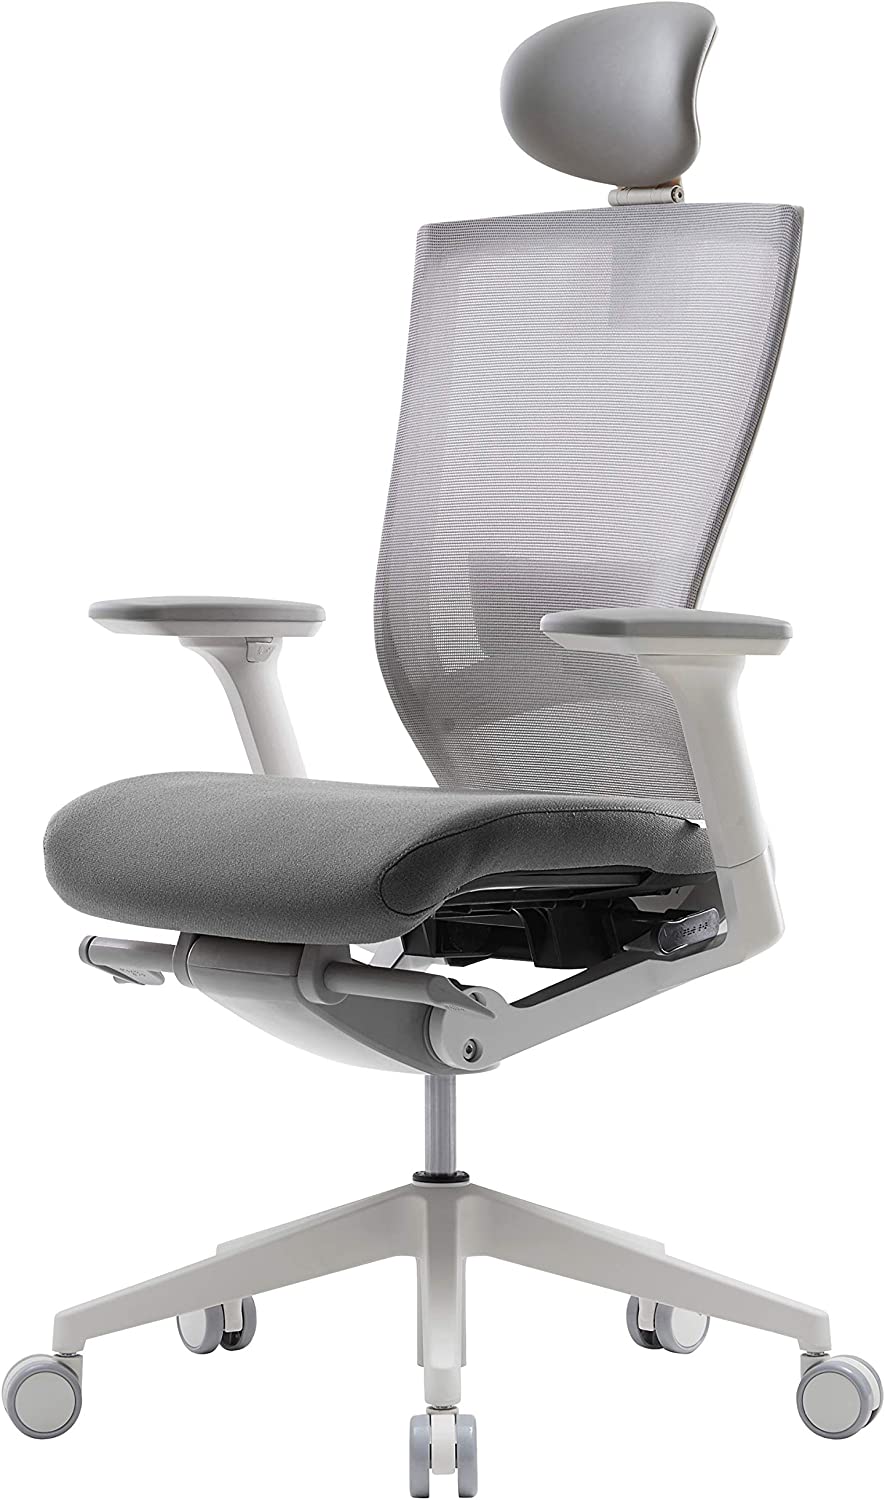 6 Best Office Chair For Lower Back & Hip Pain – Comfy Option